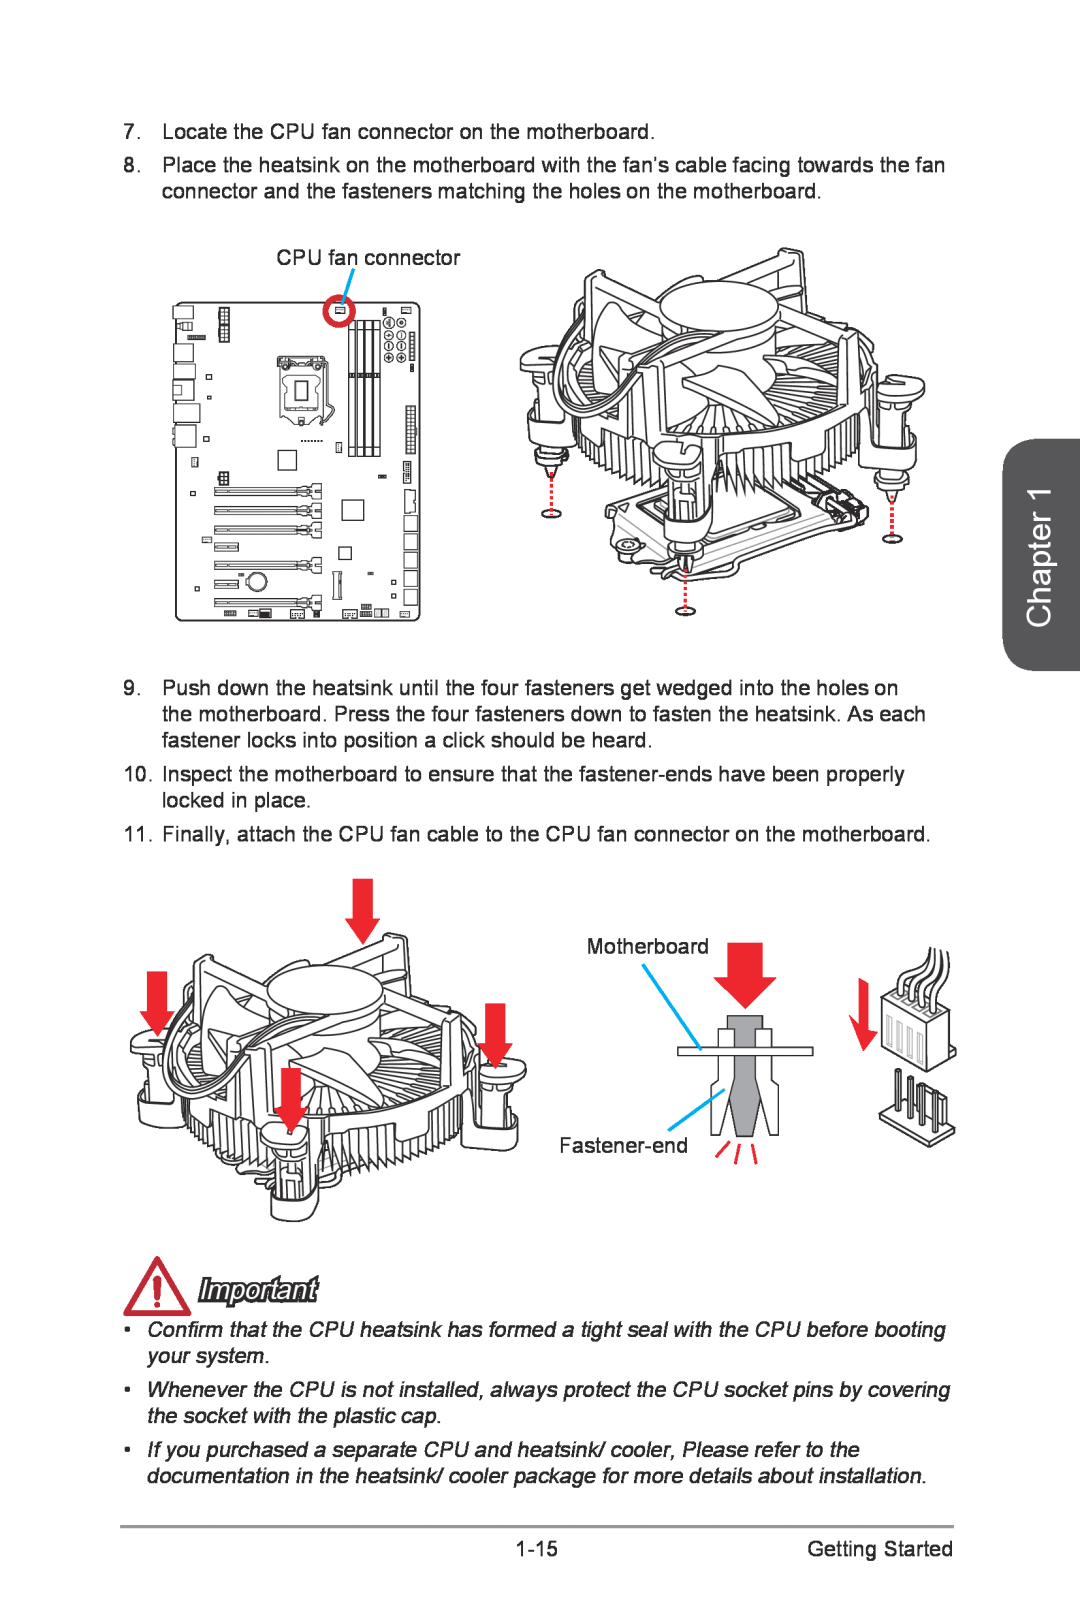 MSI Z87-XPOWER manual Chapter, Locate the CPU fan connector on the motherboard 